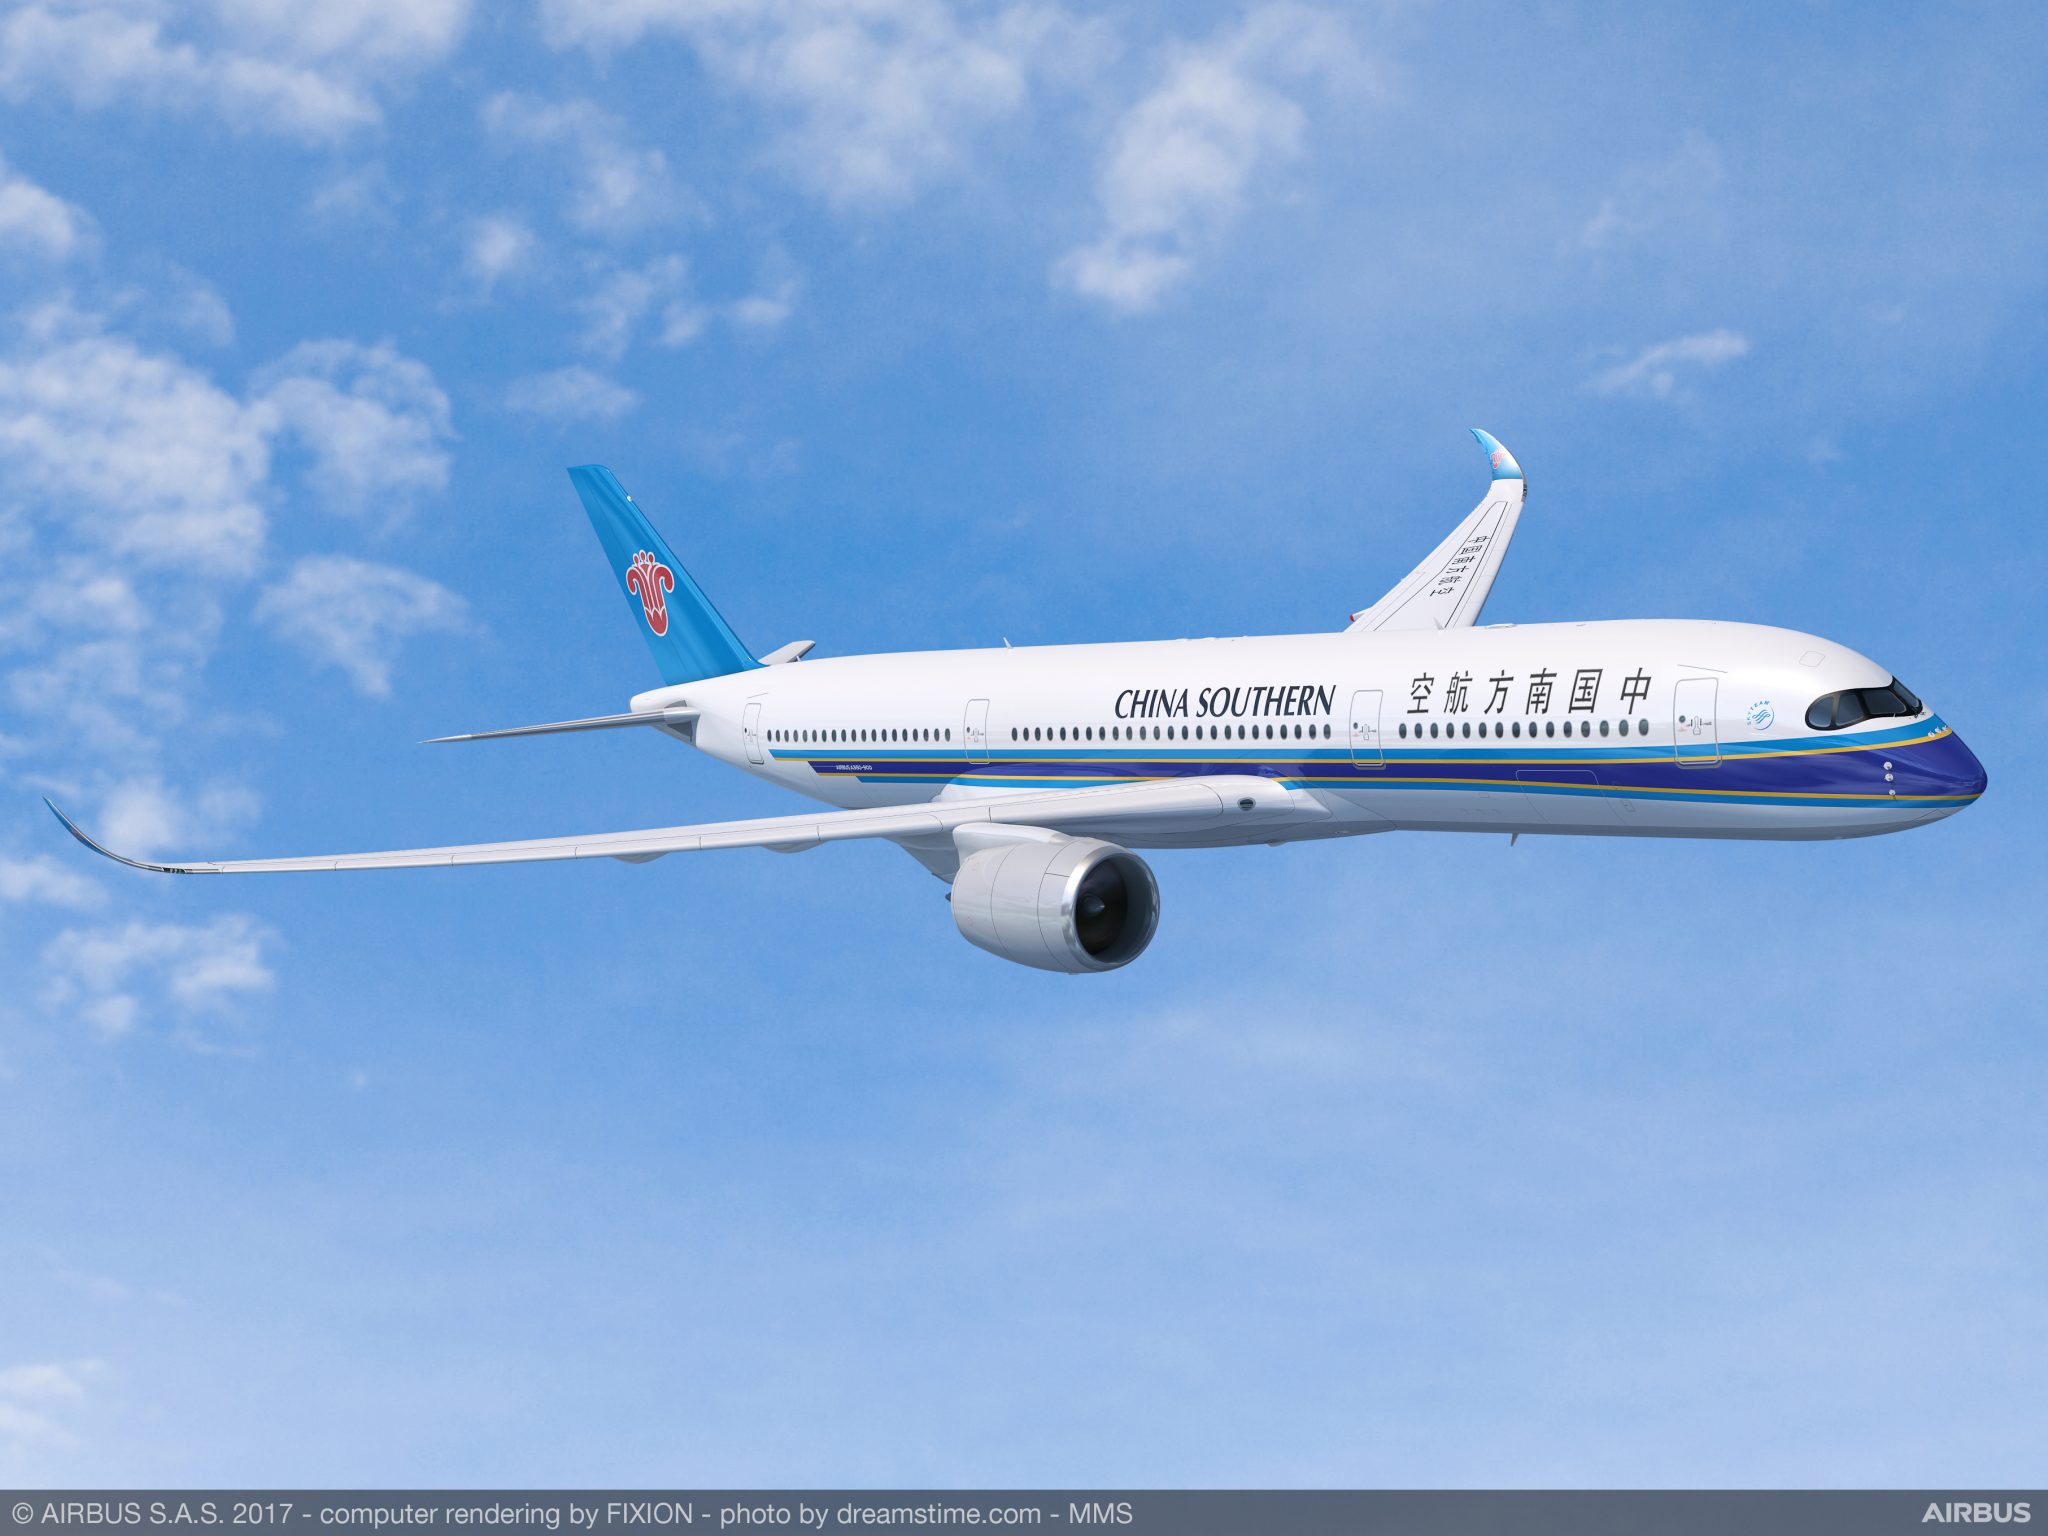 China Southern schedules two 737 MAXs to return to service